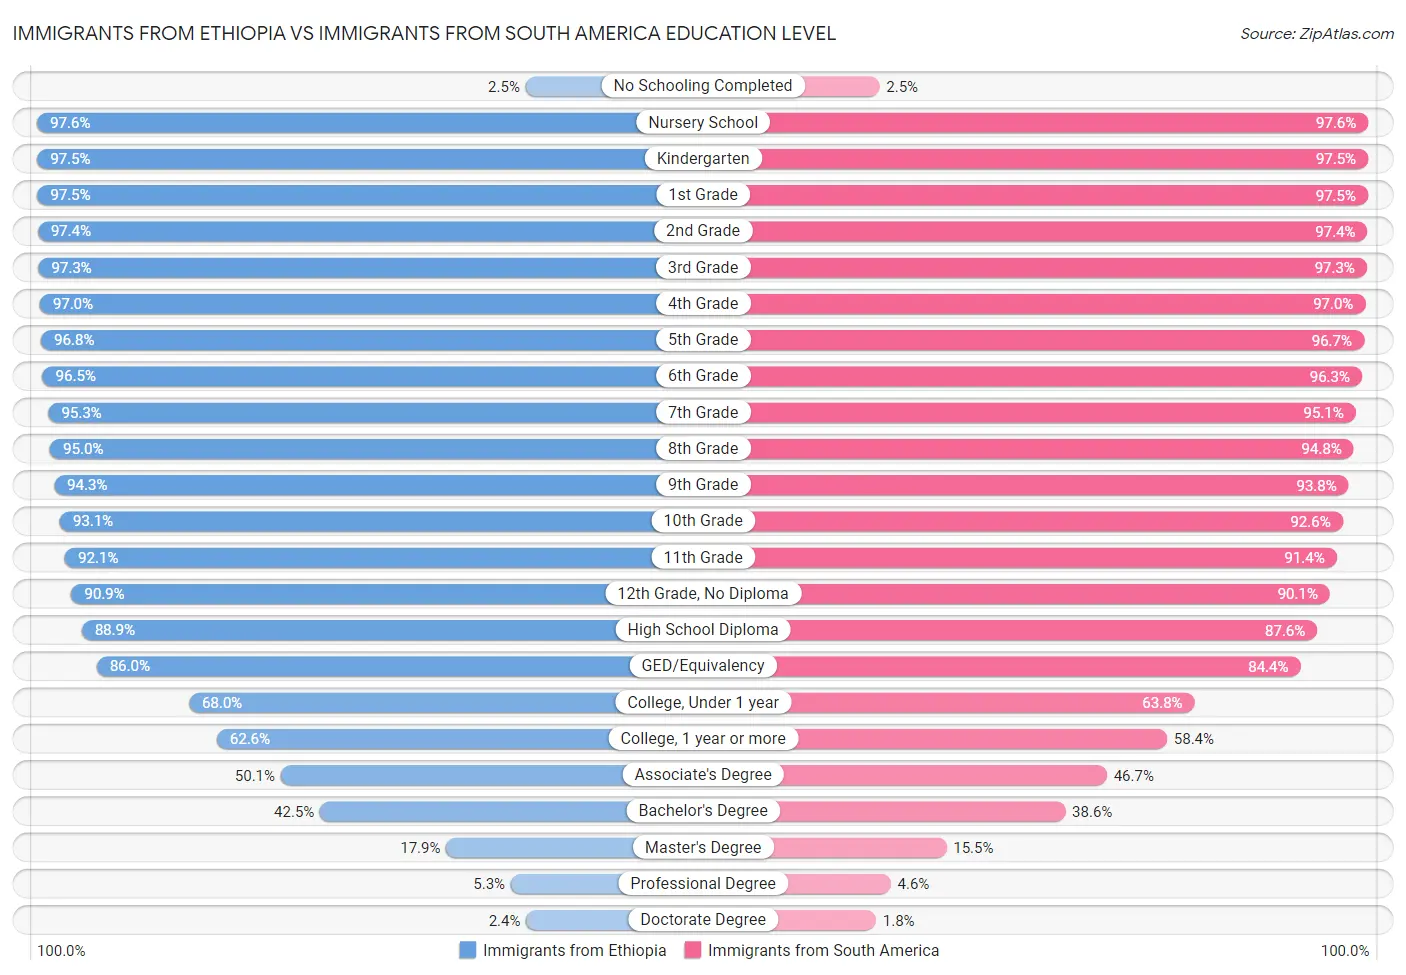 Immigrants from Ethiopia vs Immigrants from South America Education Level